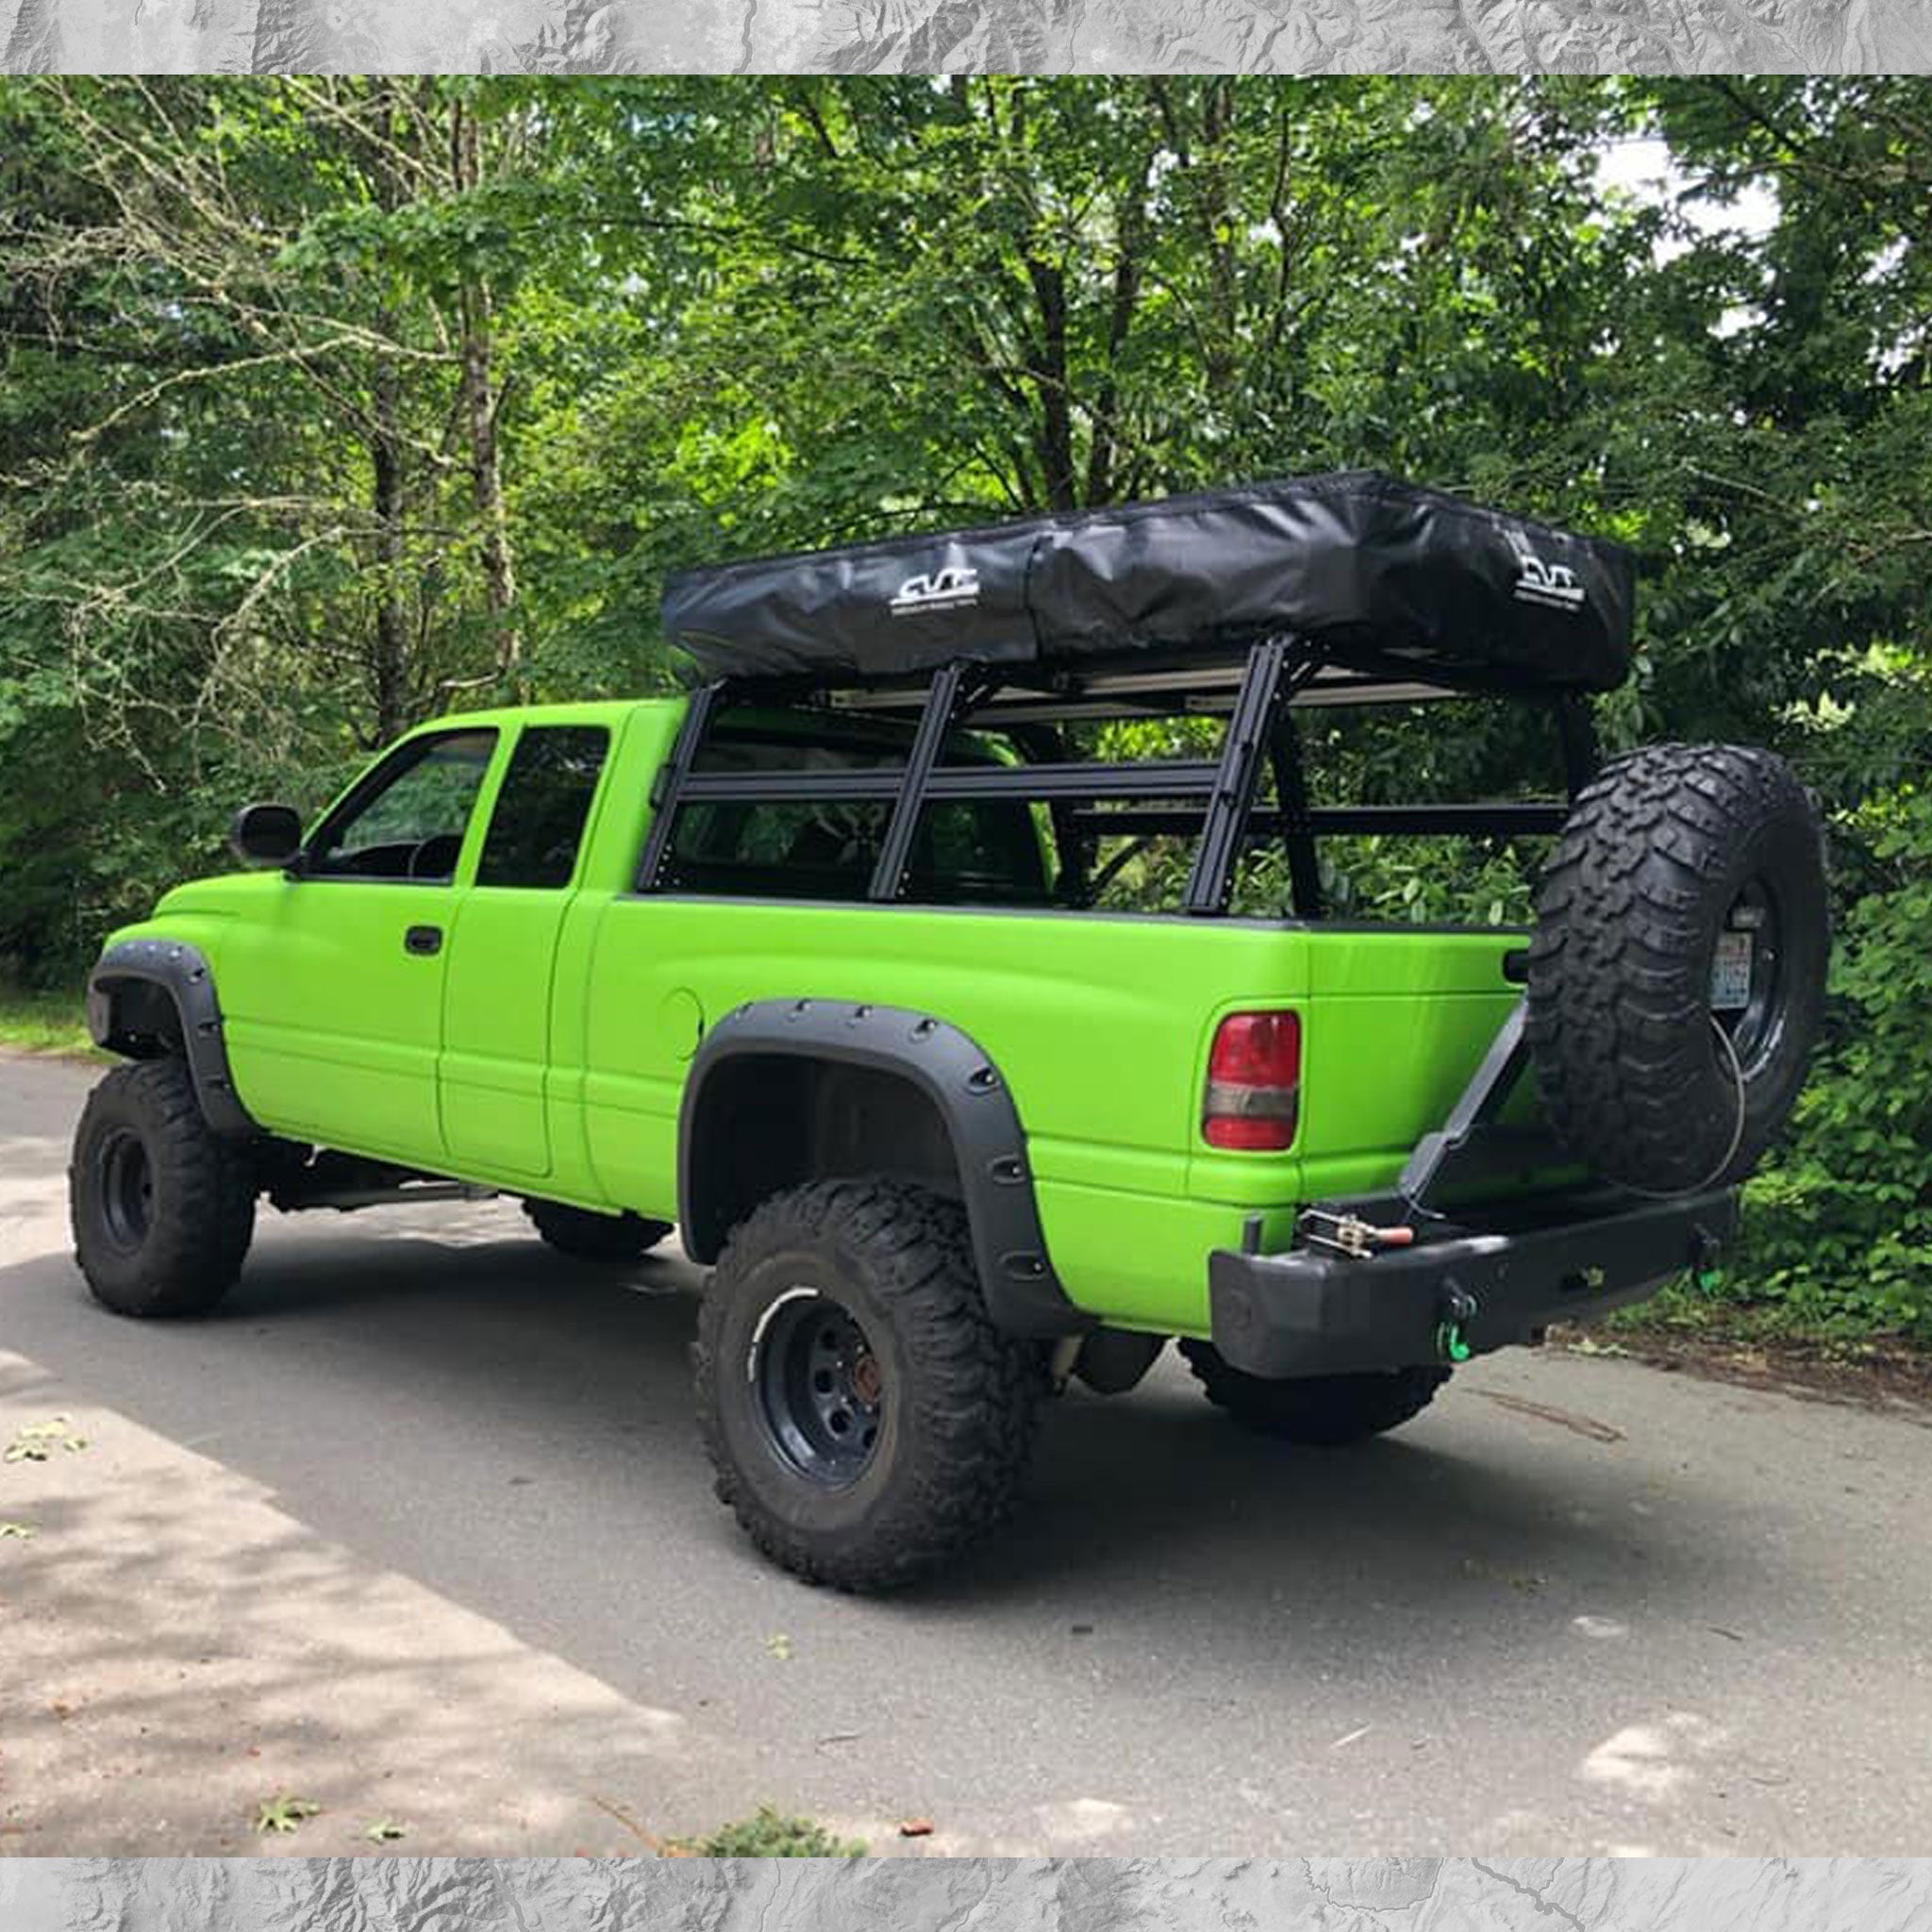 Dodge Ram with basic XRT3 bed rack and closed roof top tent